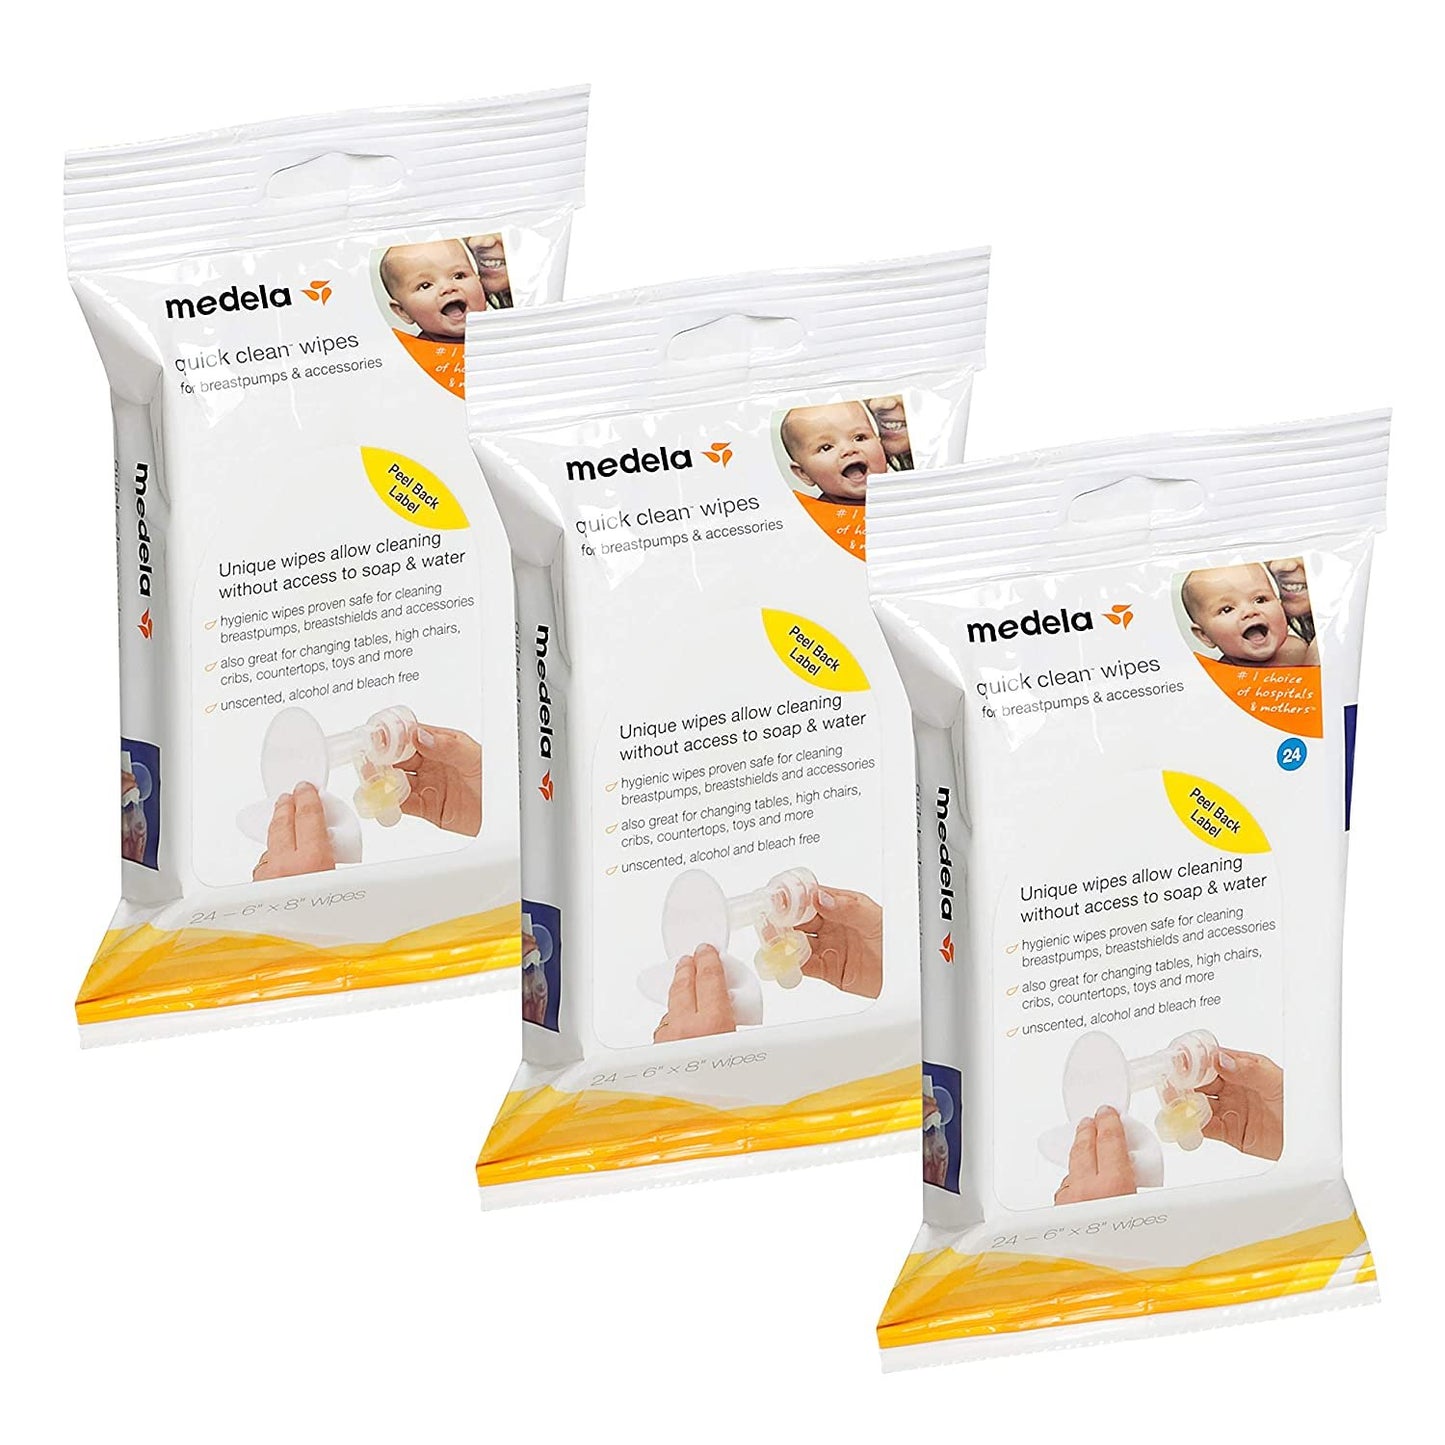 Medela Quick Clean Breast Pump and Accessory Wipes, 72 Wipes Total (3 Packs of 24), Convenient Portable Cleaning, Hygienic Wipes Safe for Cleaning High Chairs, Tables, Cribs and Countertops